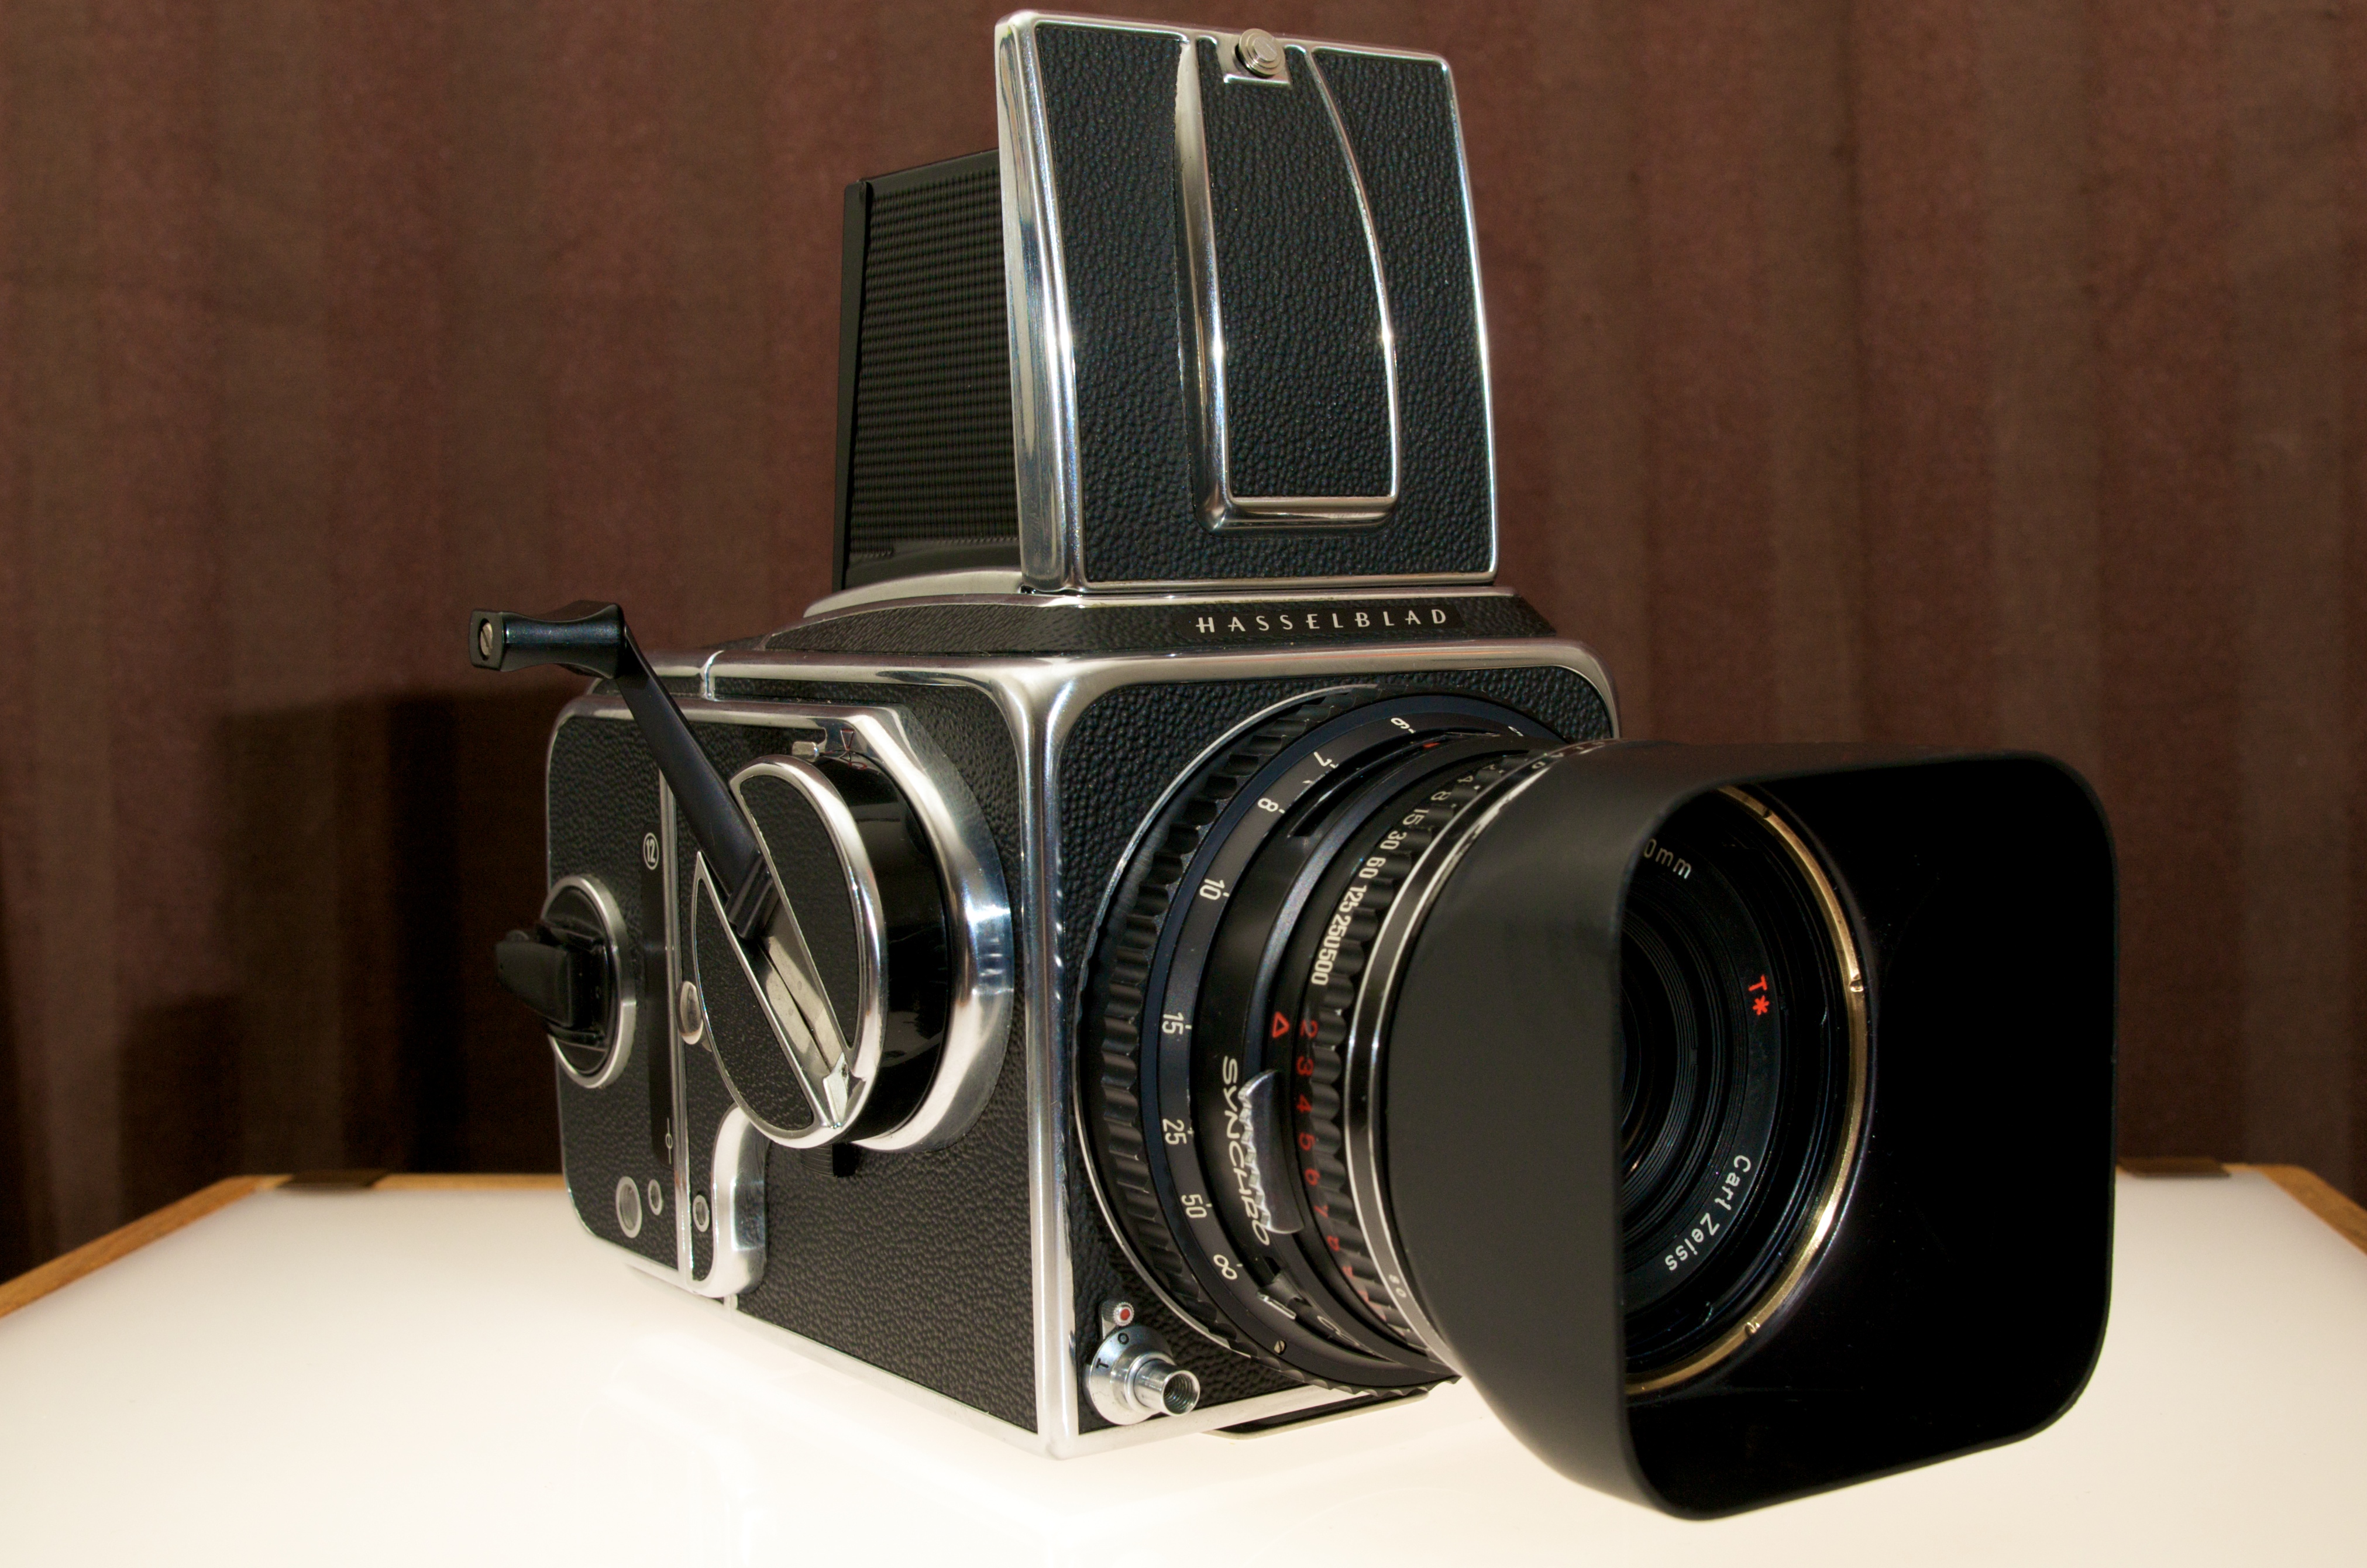 Hasselblad 500 CM medium format SLR camera with Carl Zeiss T* lens